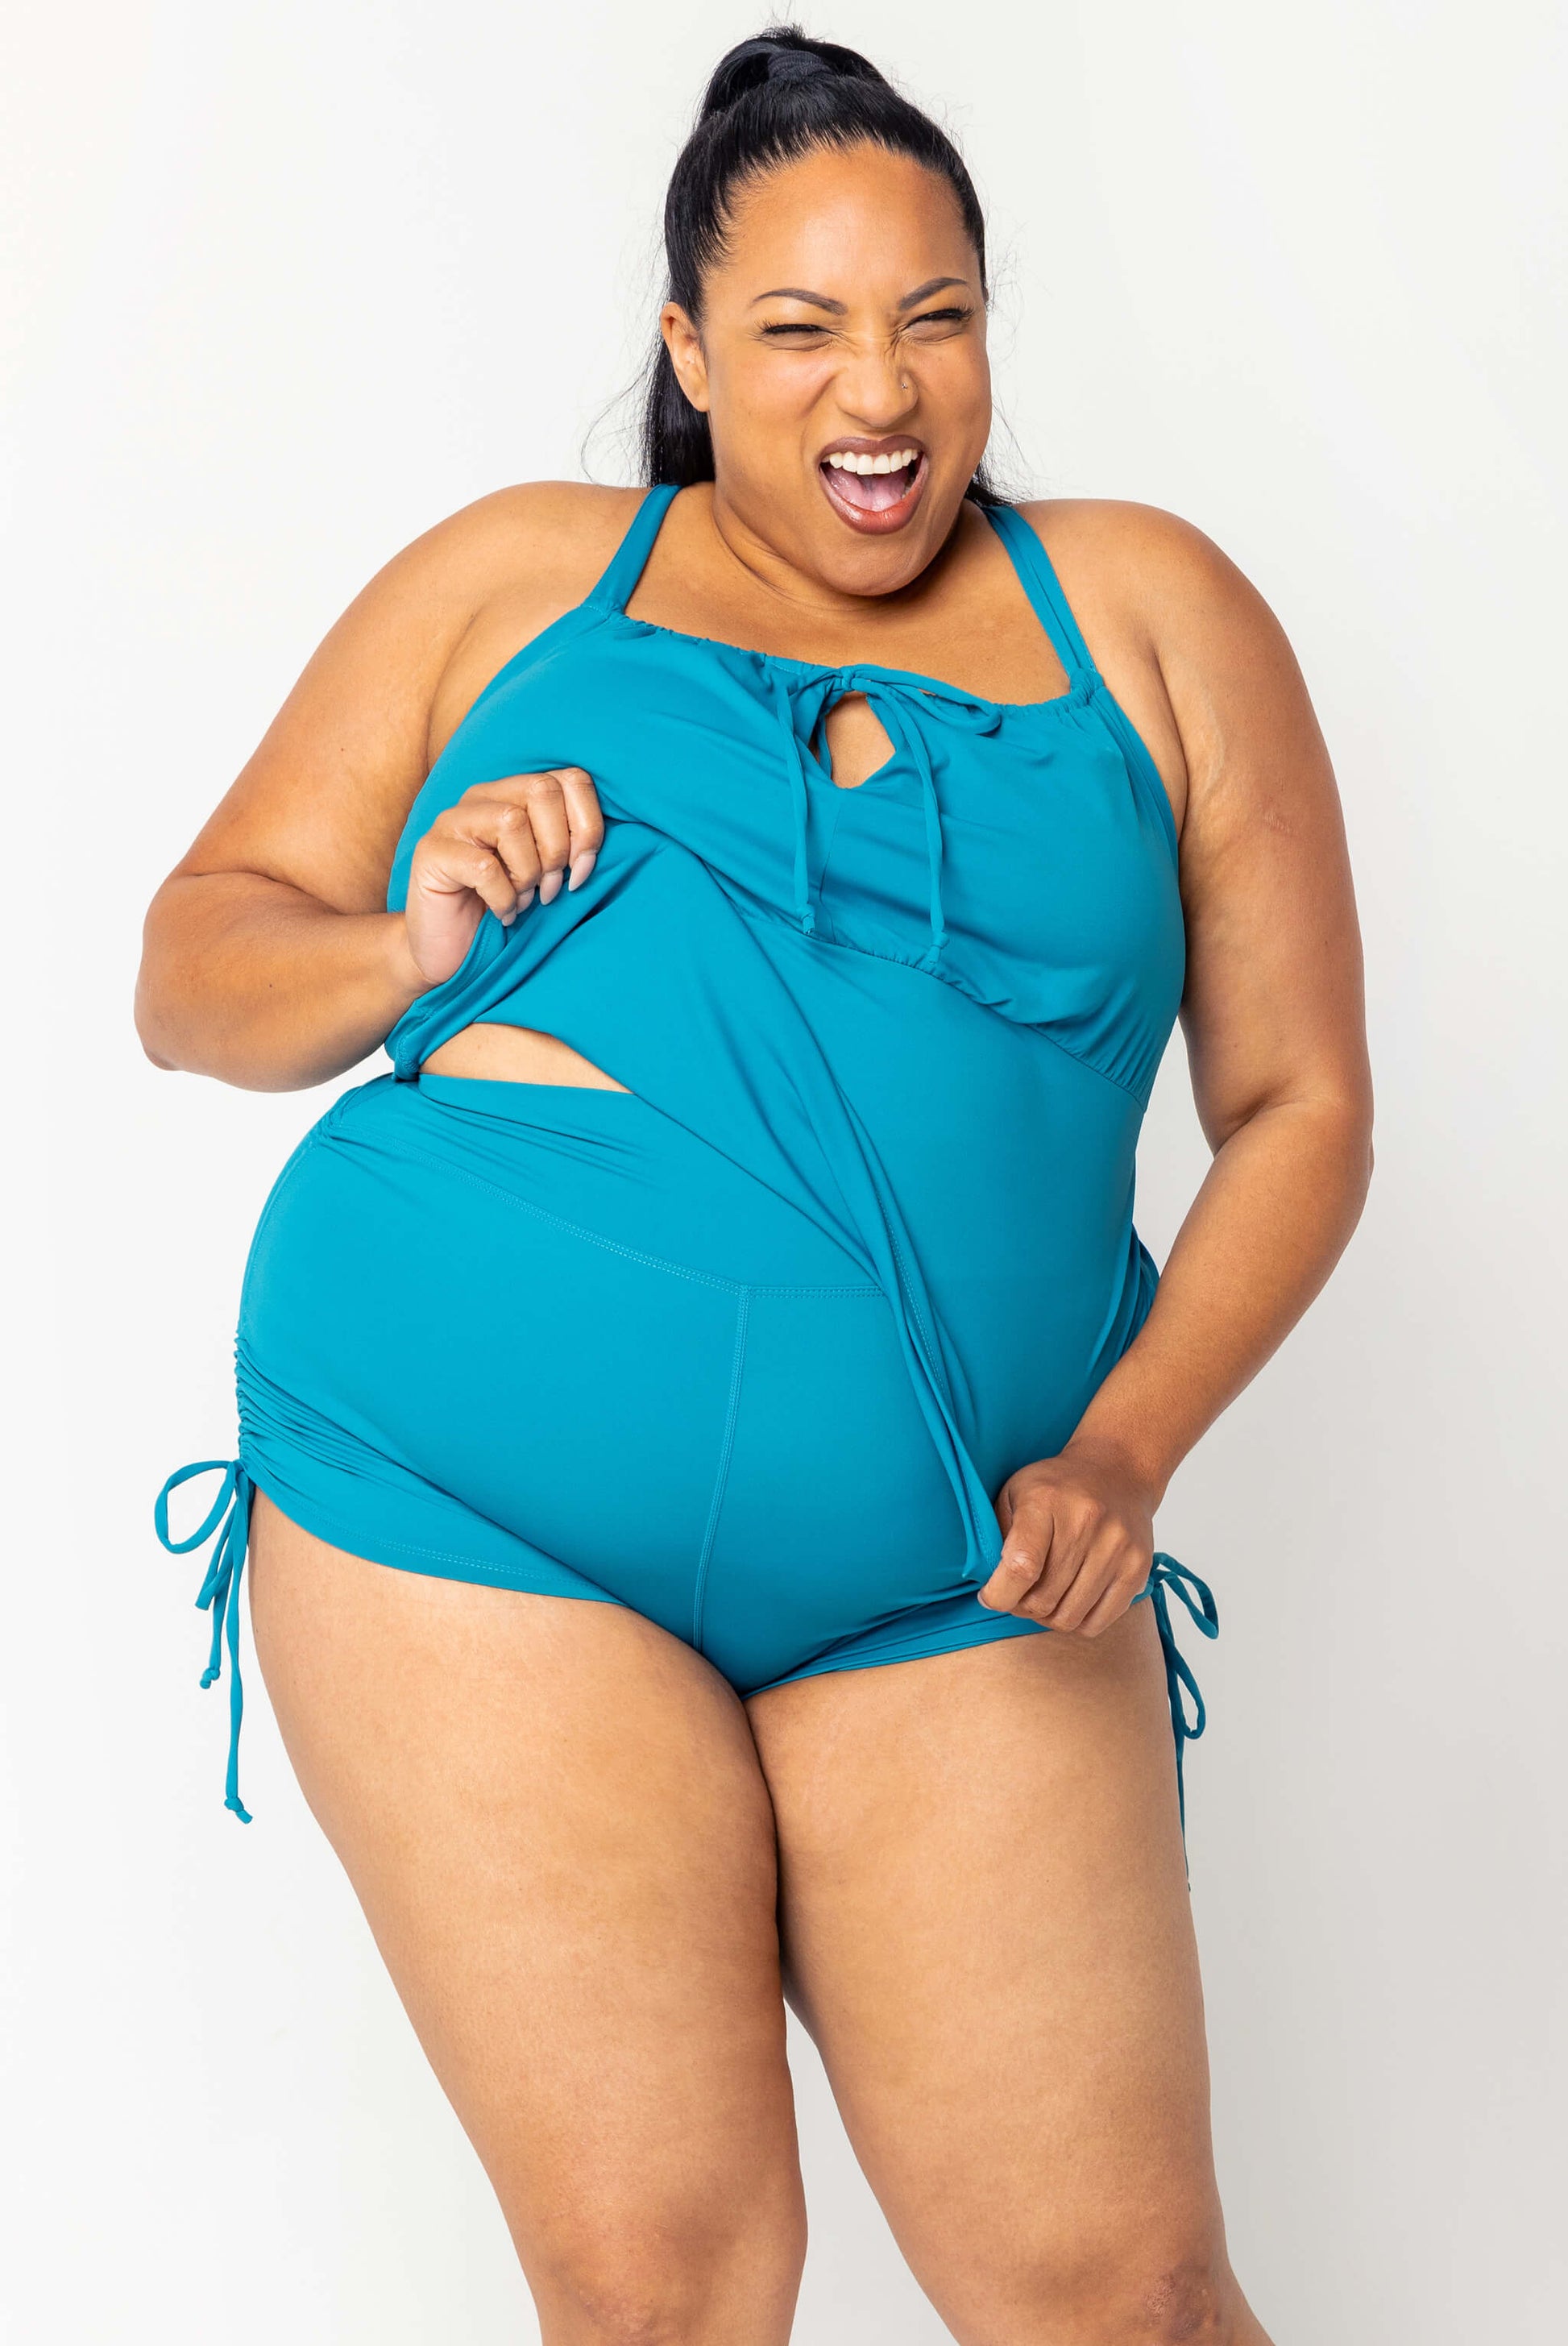 Model pulling the hem of teal swim tankini to show the matching booty shorts underneath